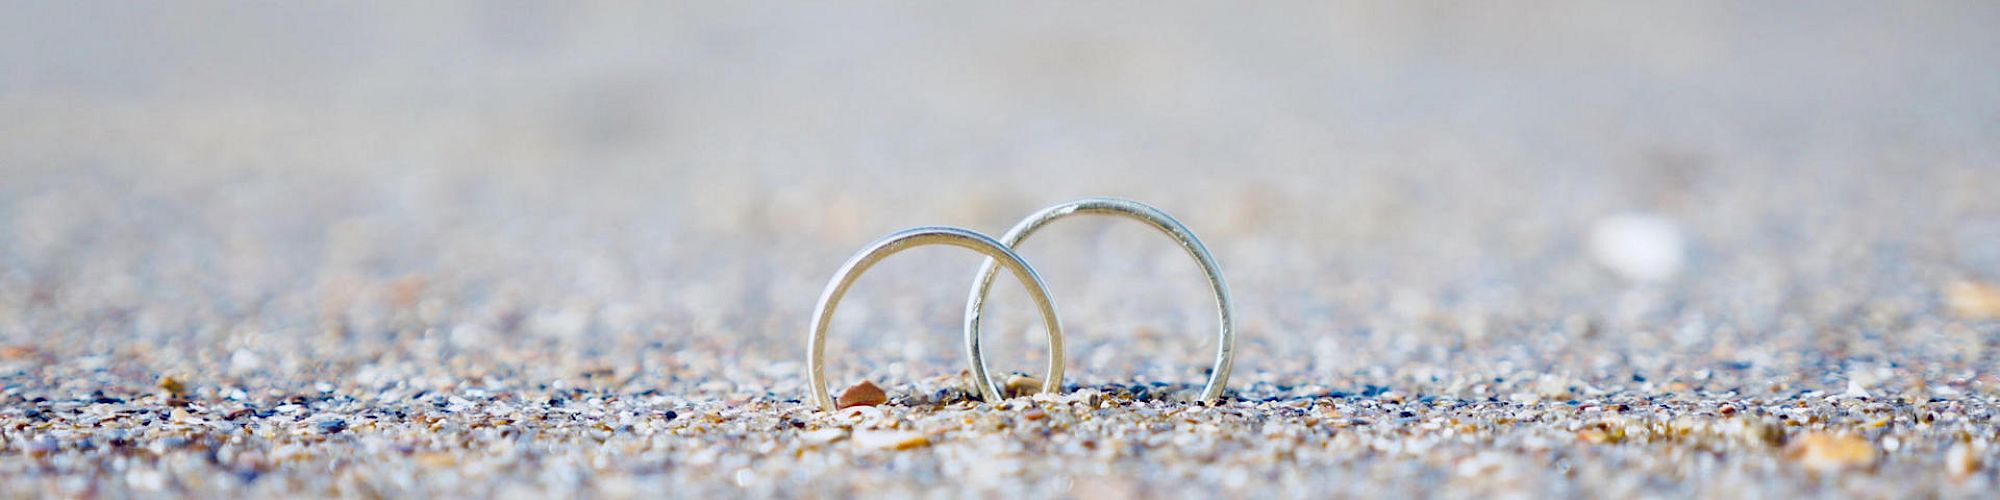 Two silver rings placed on a sandy beach with a blurred background of water, symbolizing love or commitment.